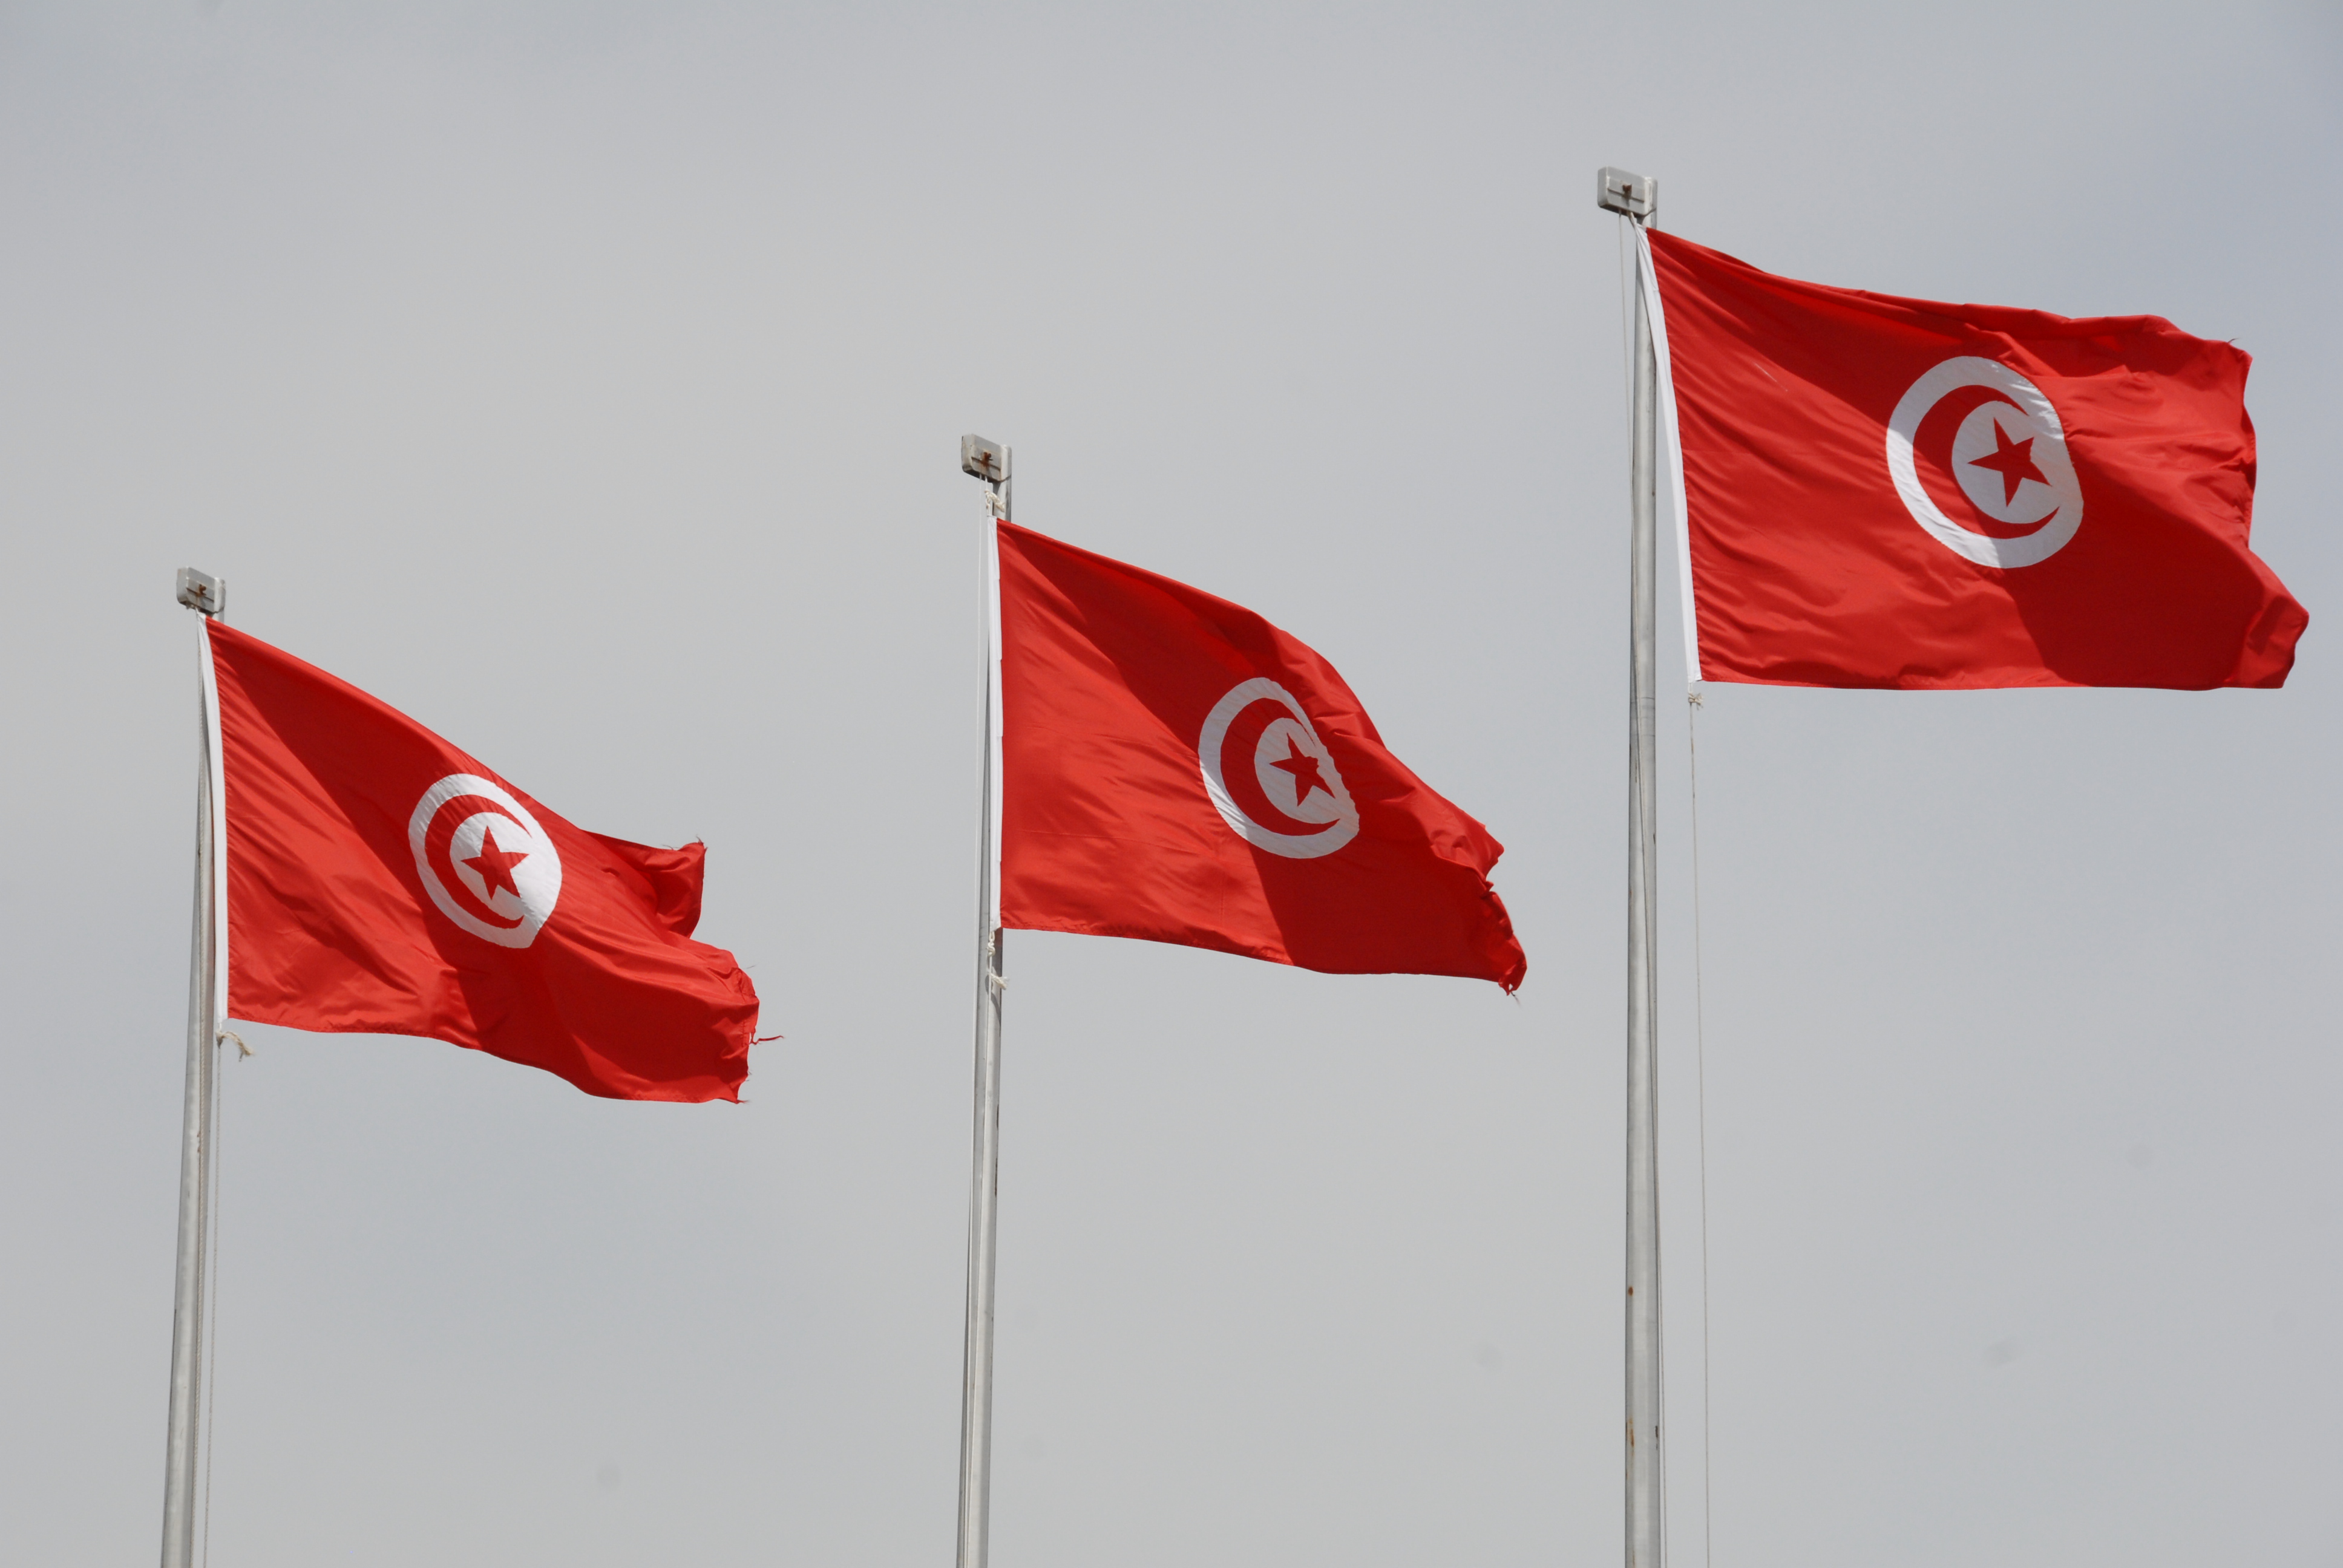 Tunisia's announcement likely to stir fresh strains in coalition